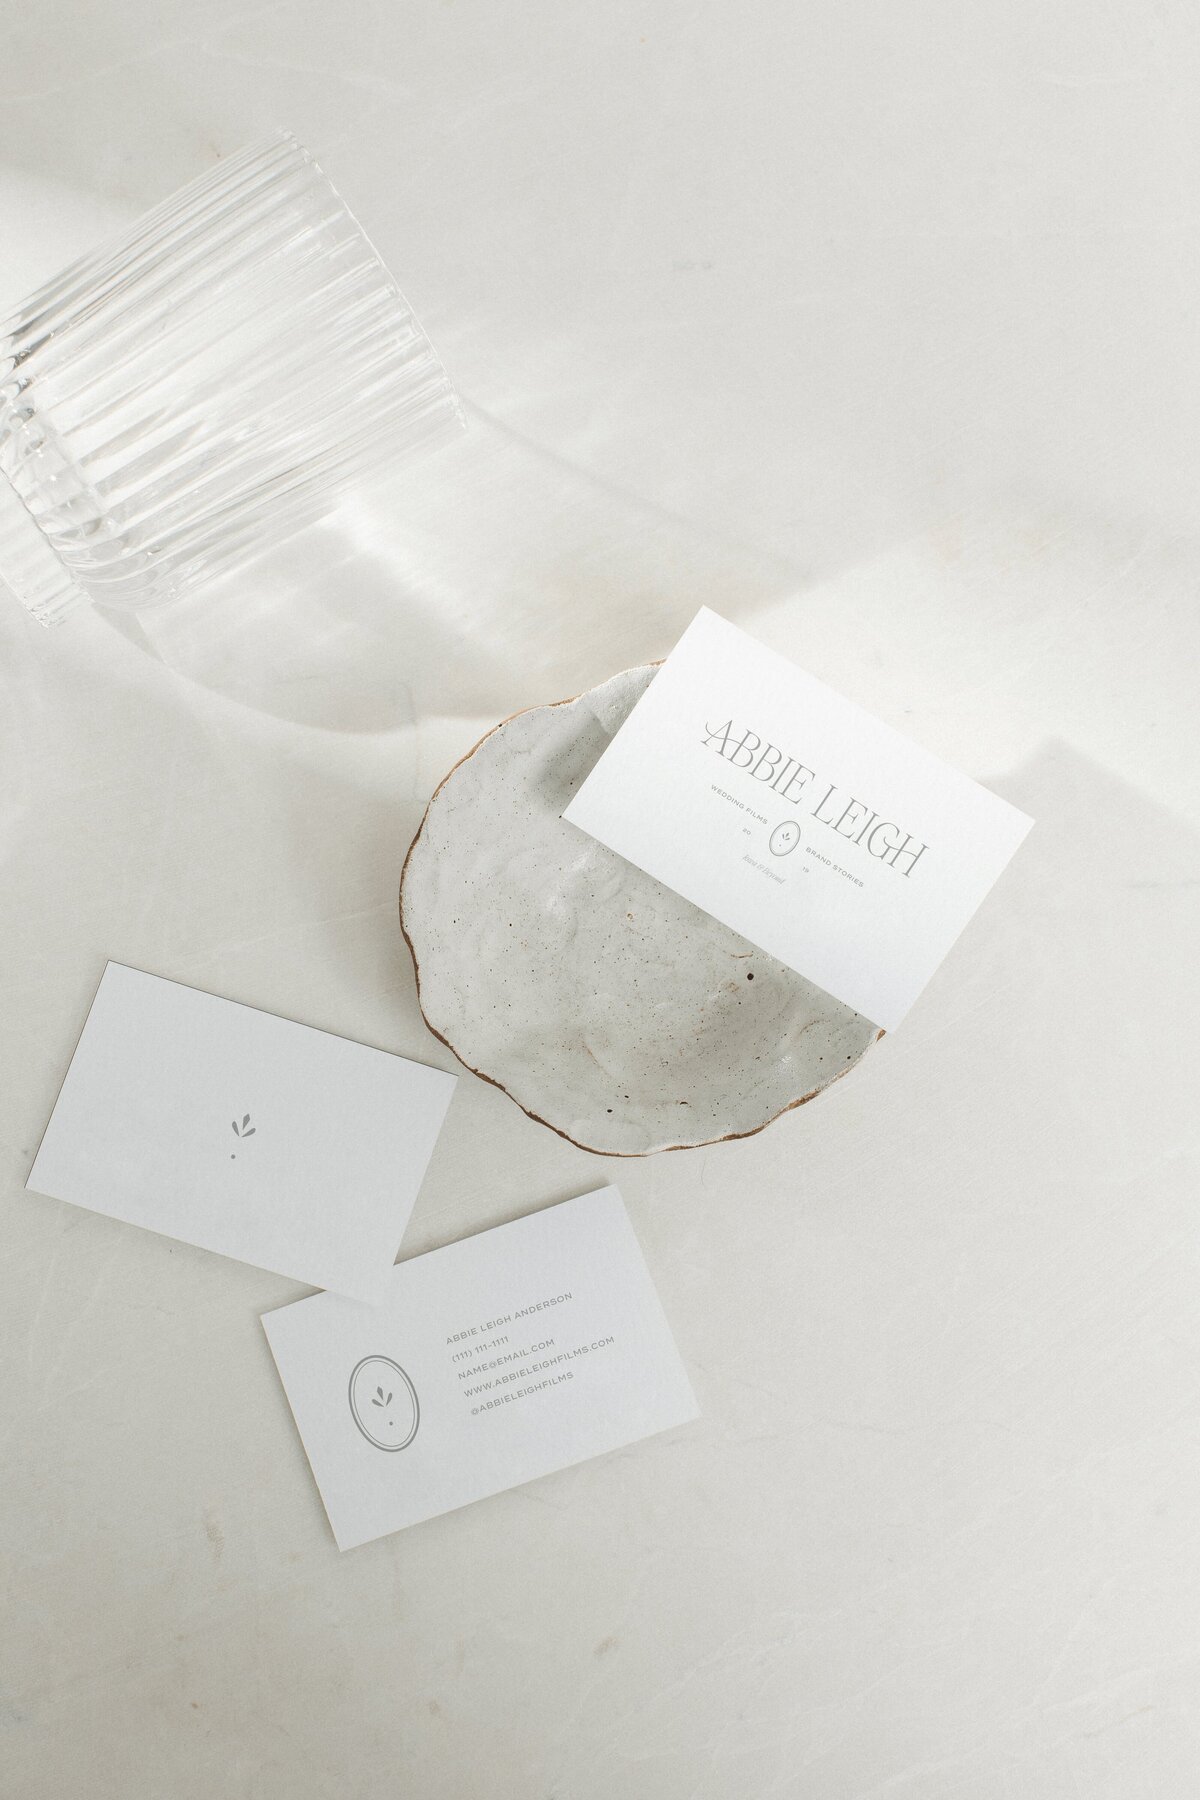 Wedding videographer logo on white business cards